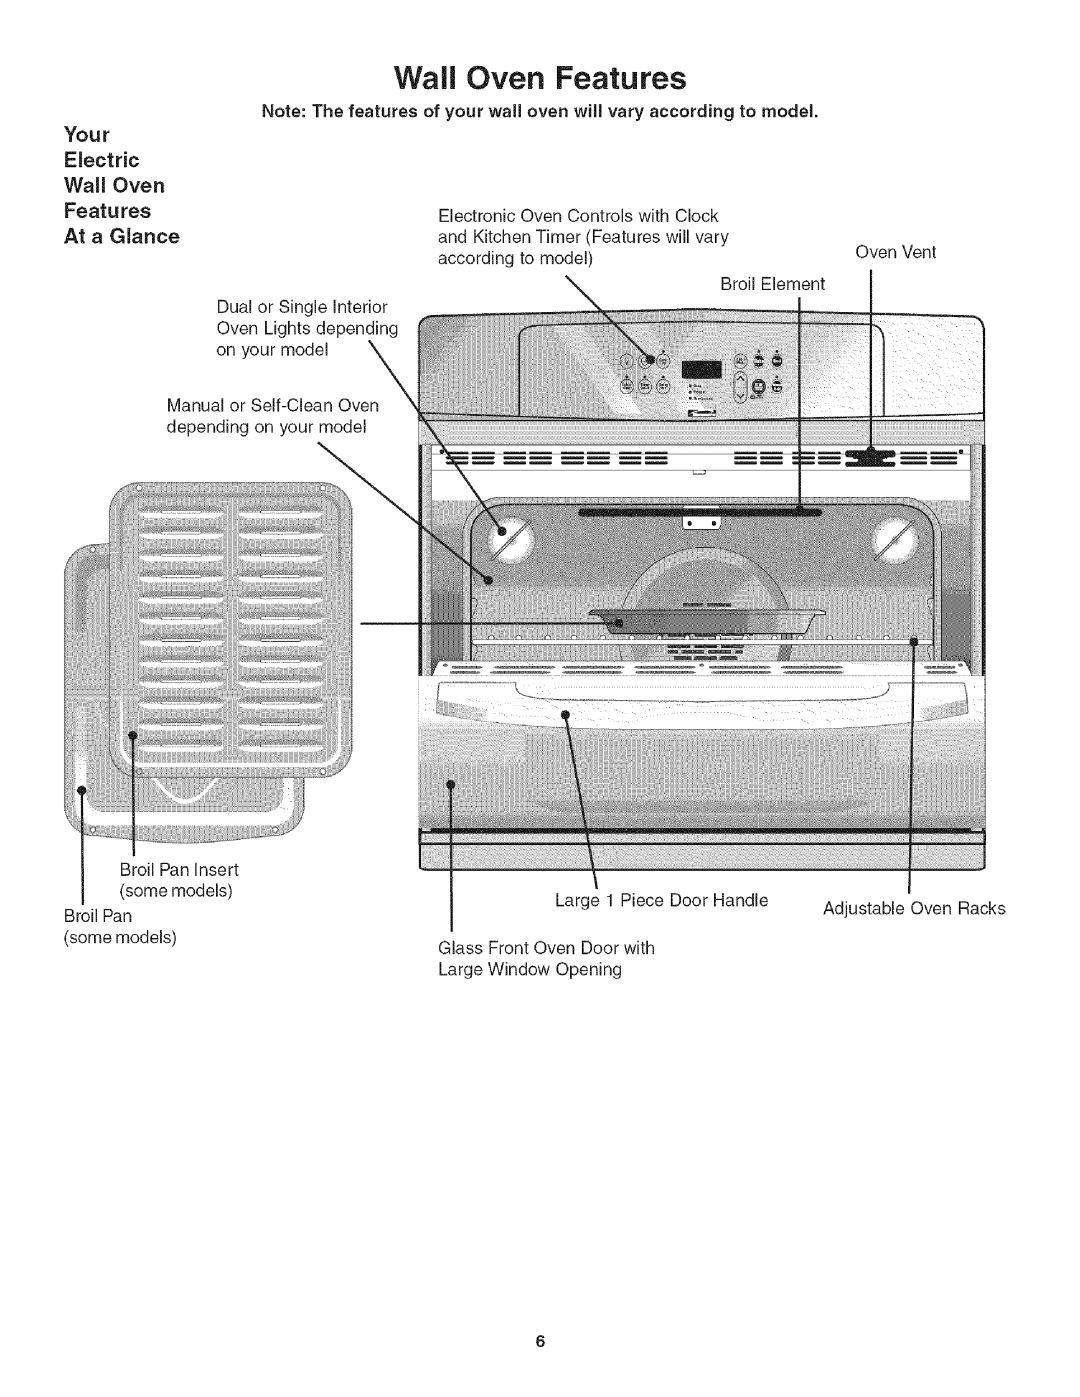 Kenmore 790.4778, 790.4783, 790.4717 manual Your Electric Wall Oven Features At a Glance 